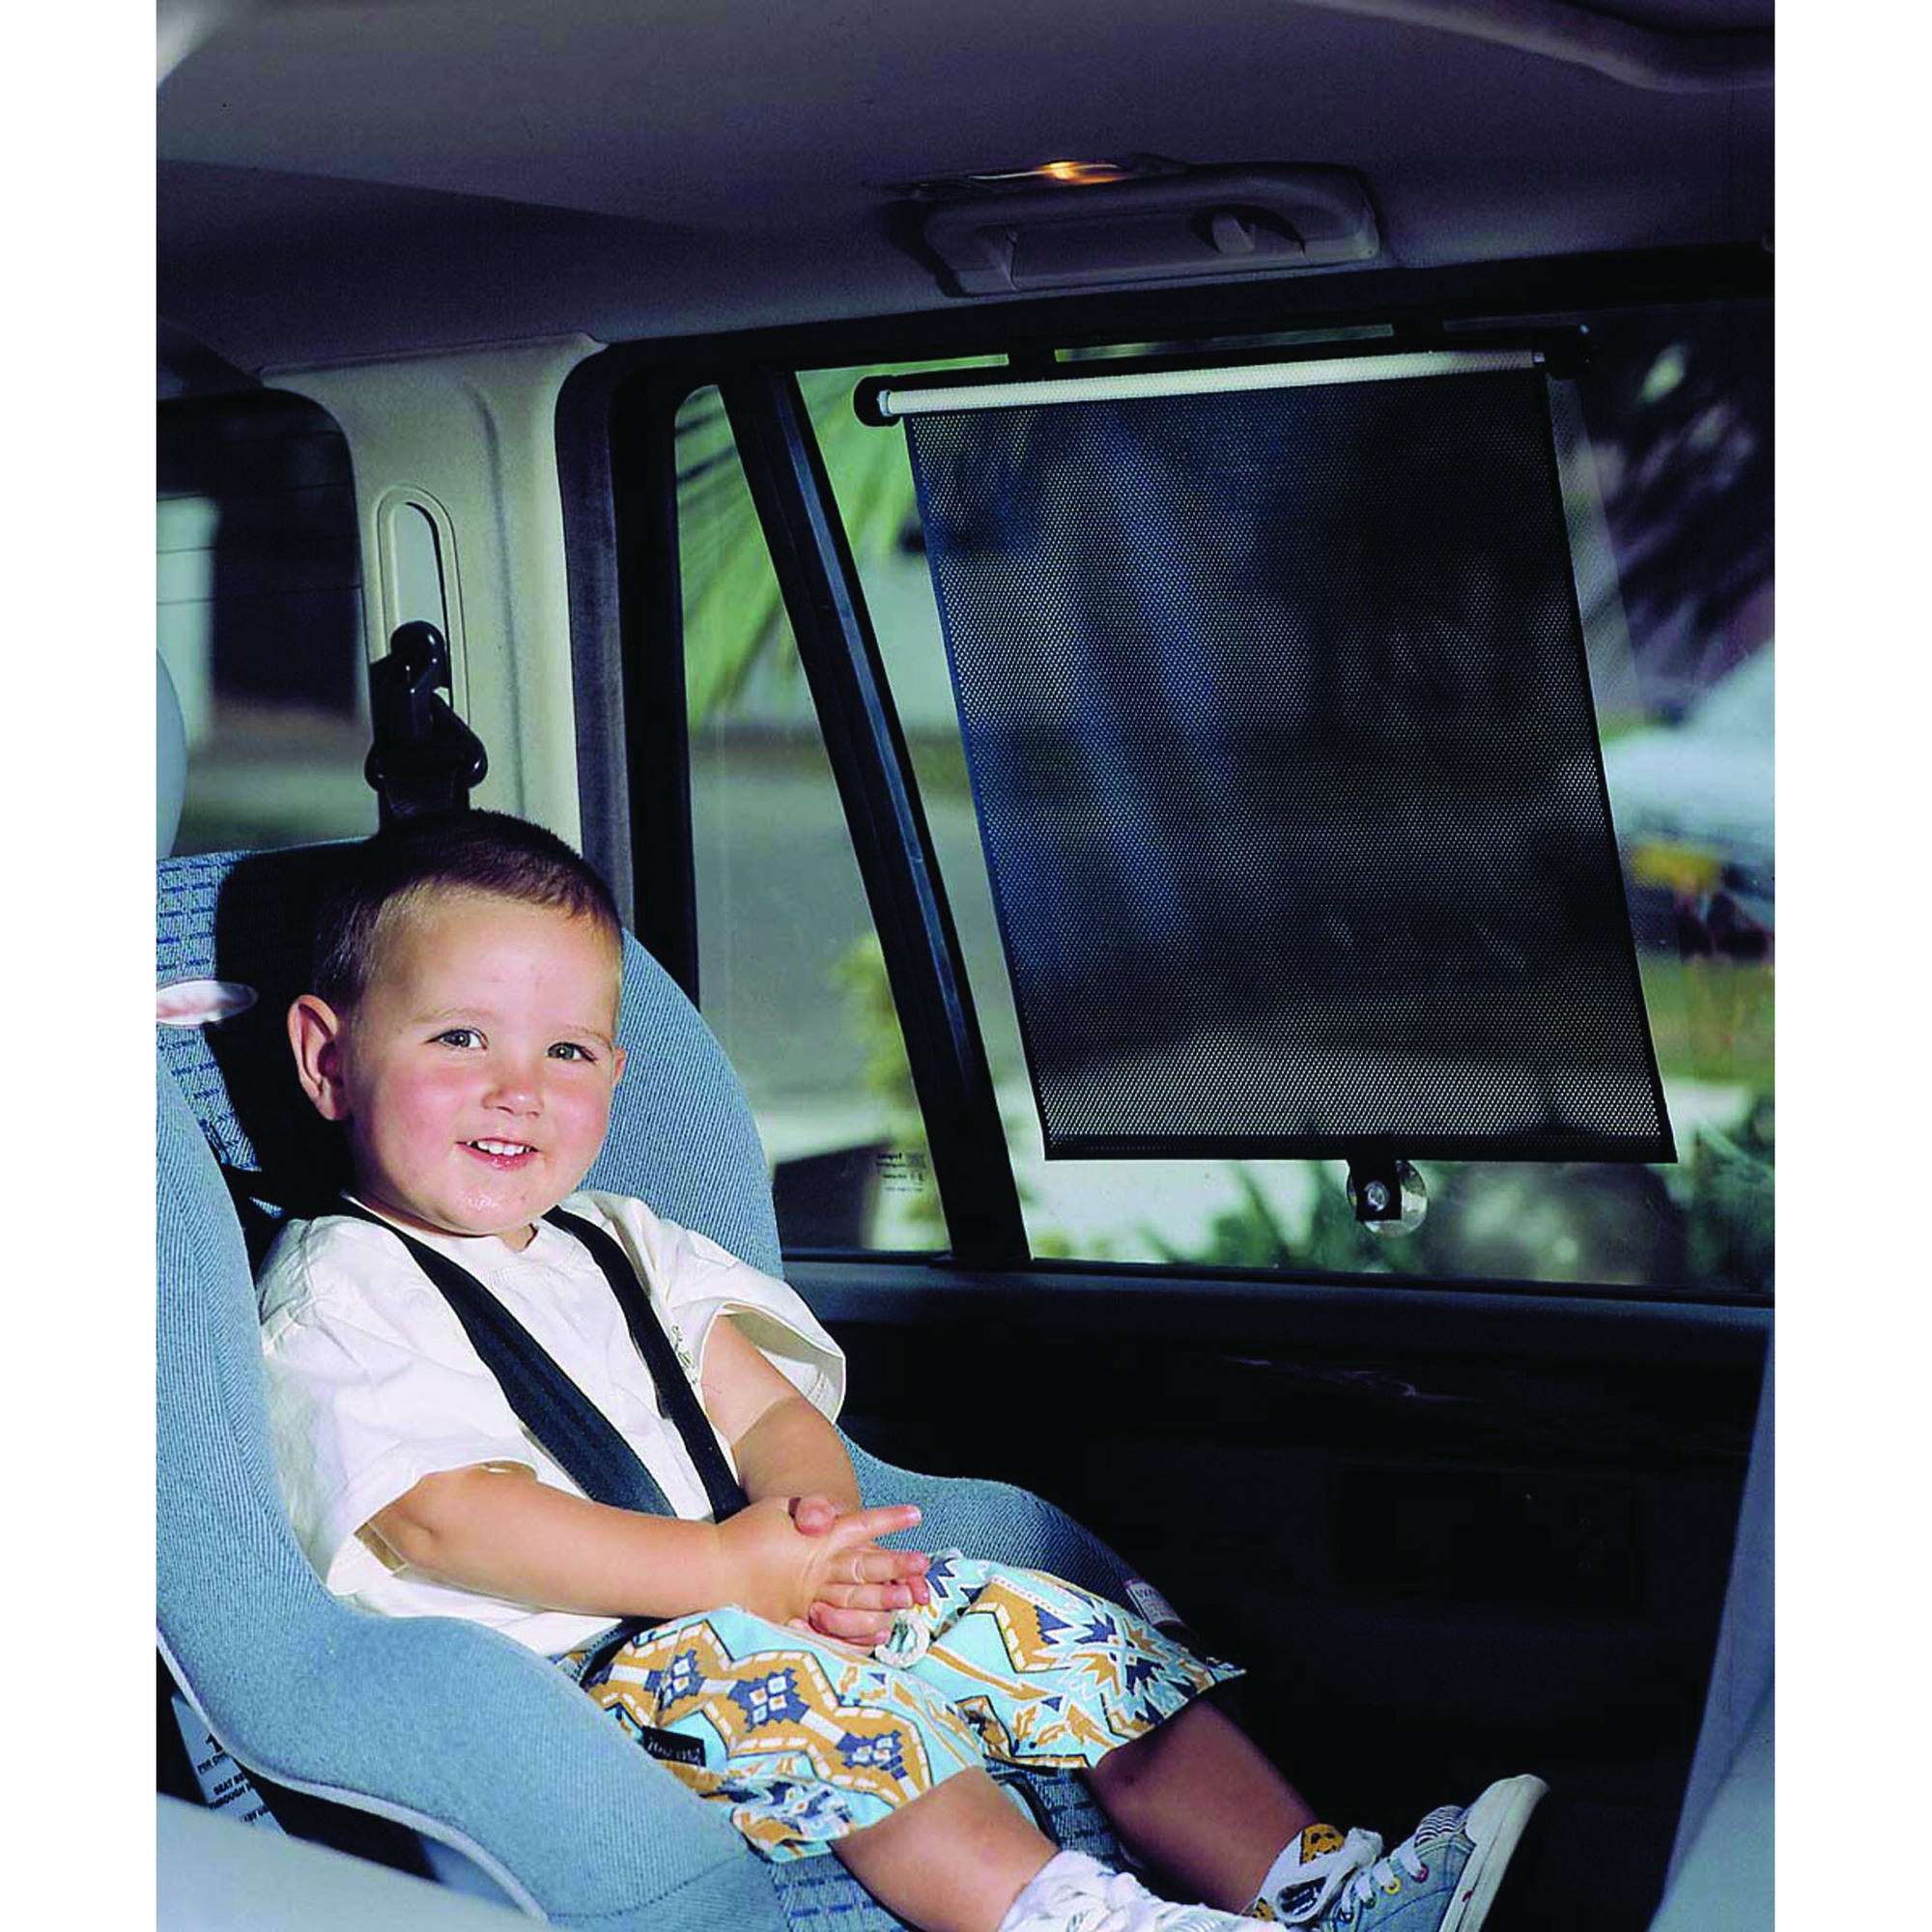 Dreambaby Model L2072 Adjustable Baby Car Sun Shade, 2 Count in Black - image 1 of 7